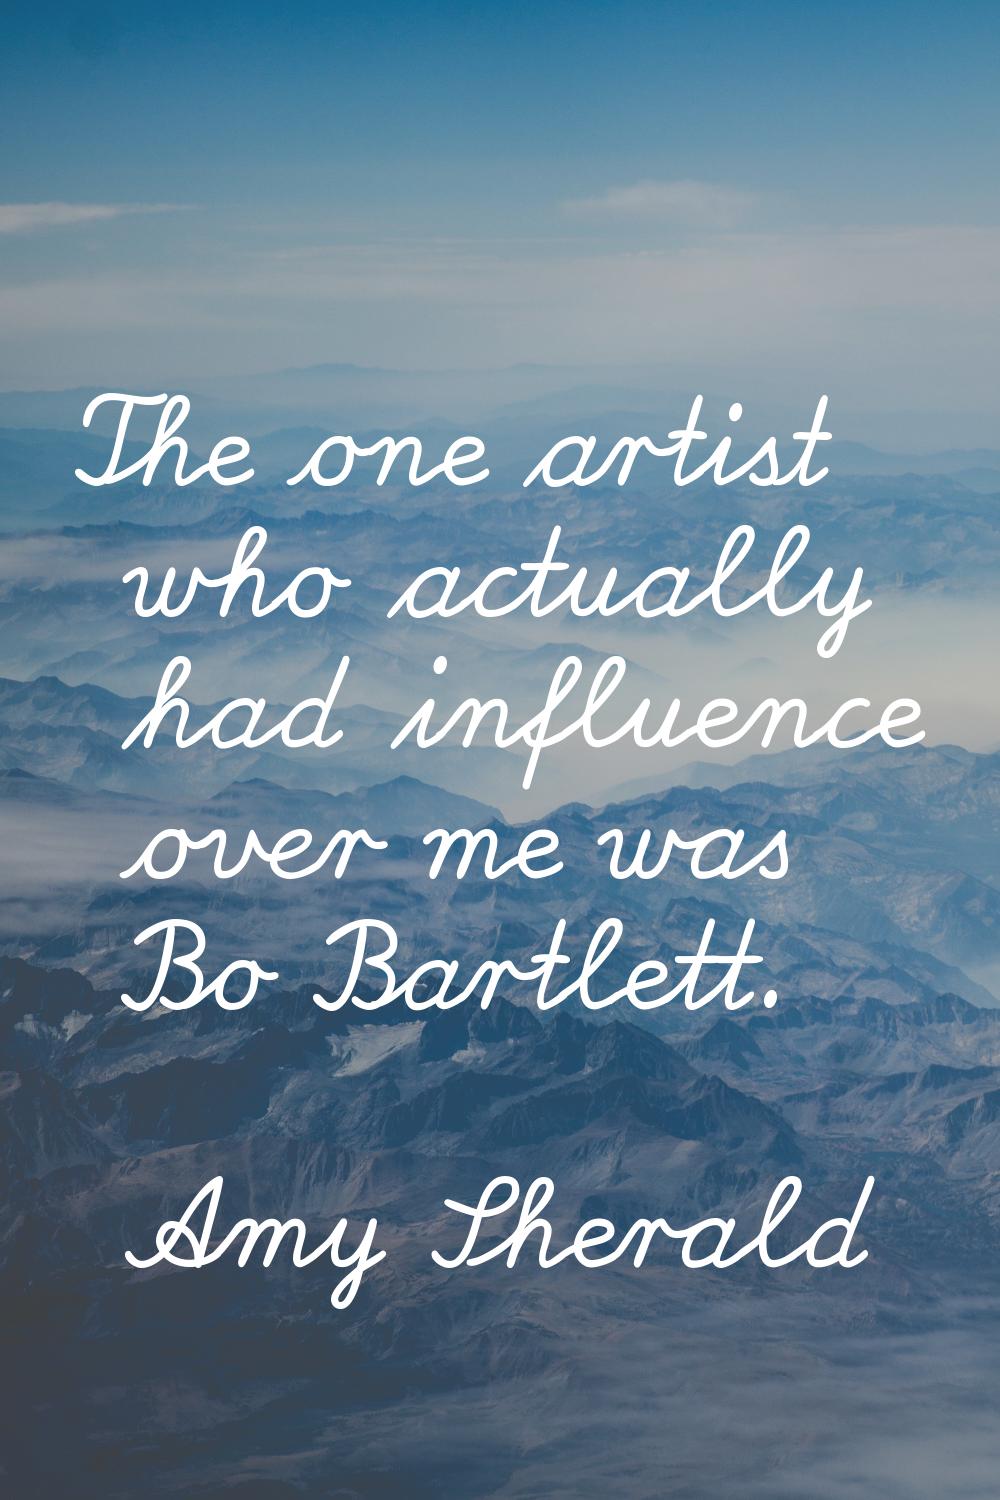 The one artist who actually had influence over me was Bo Bartlett.